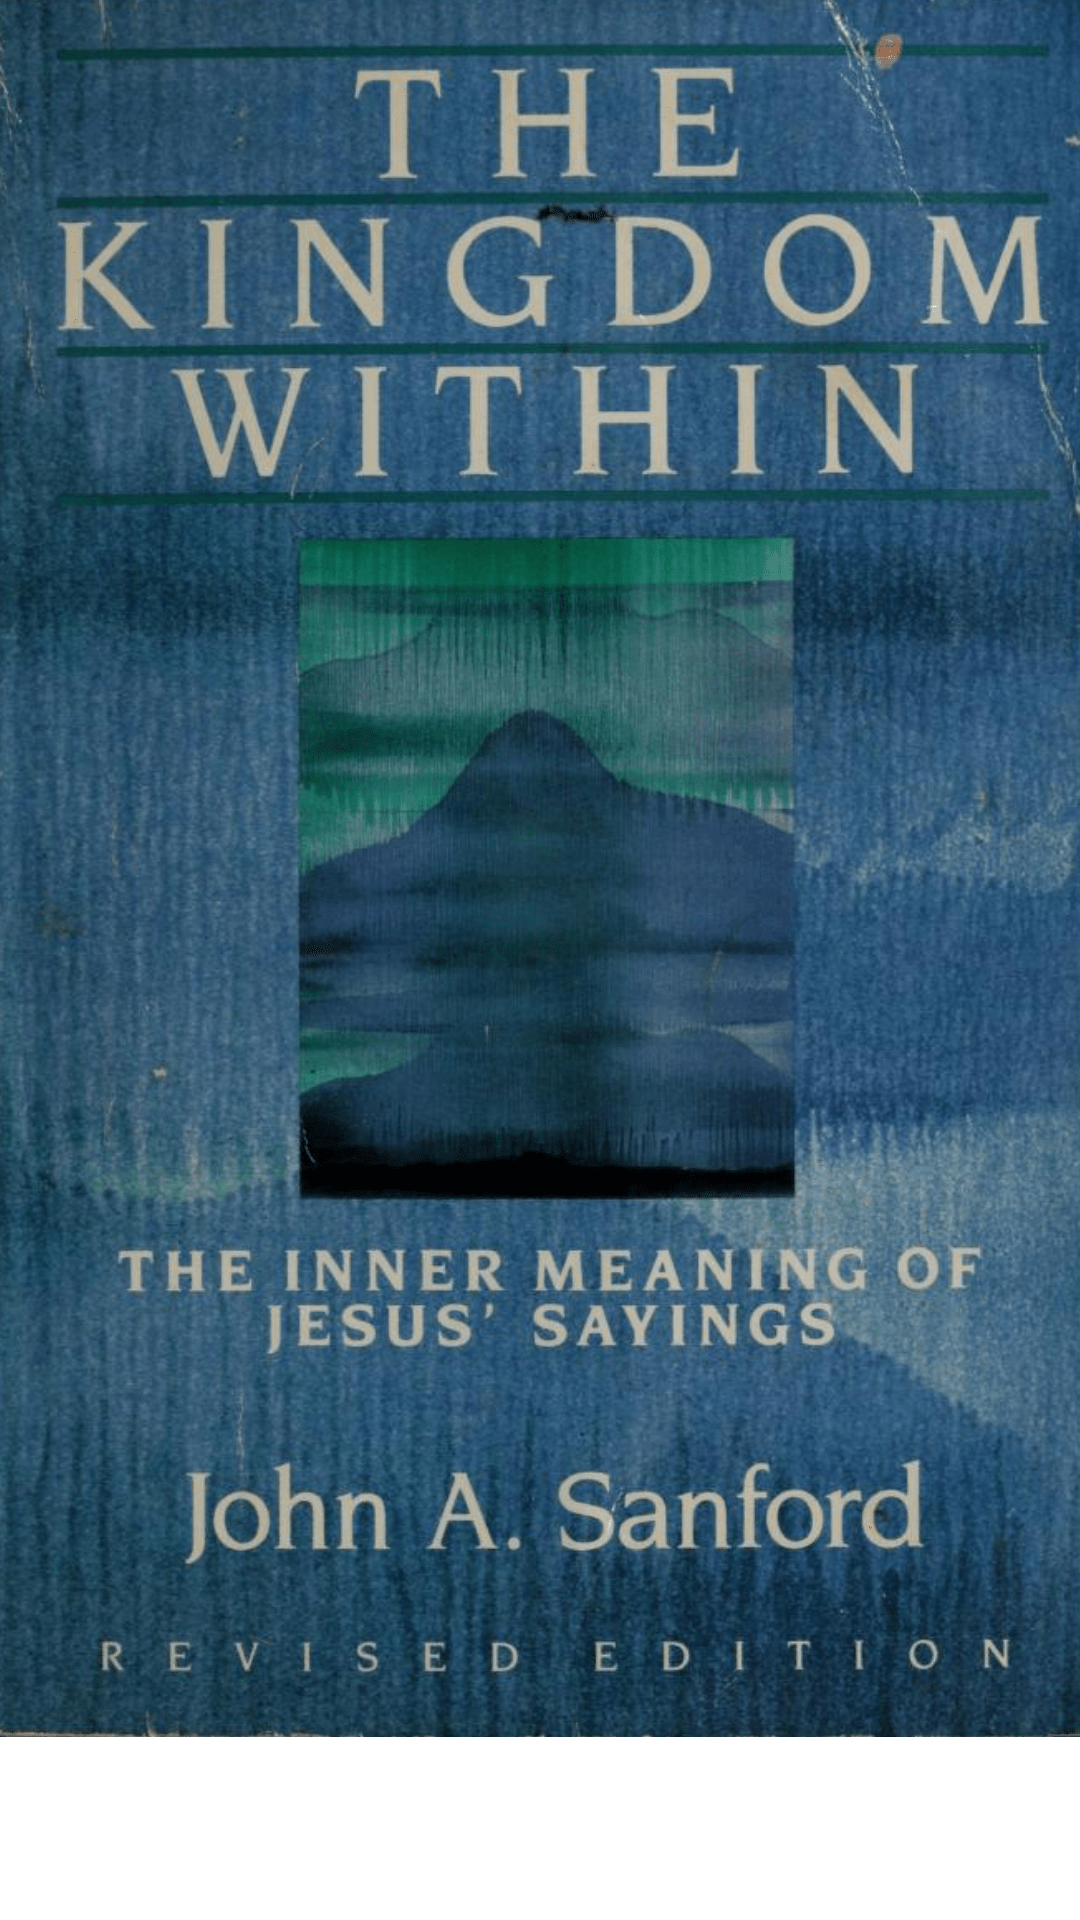 The Kingdom Within by John A. Sanford